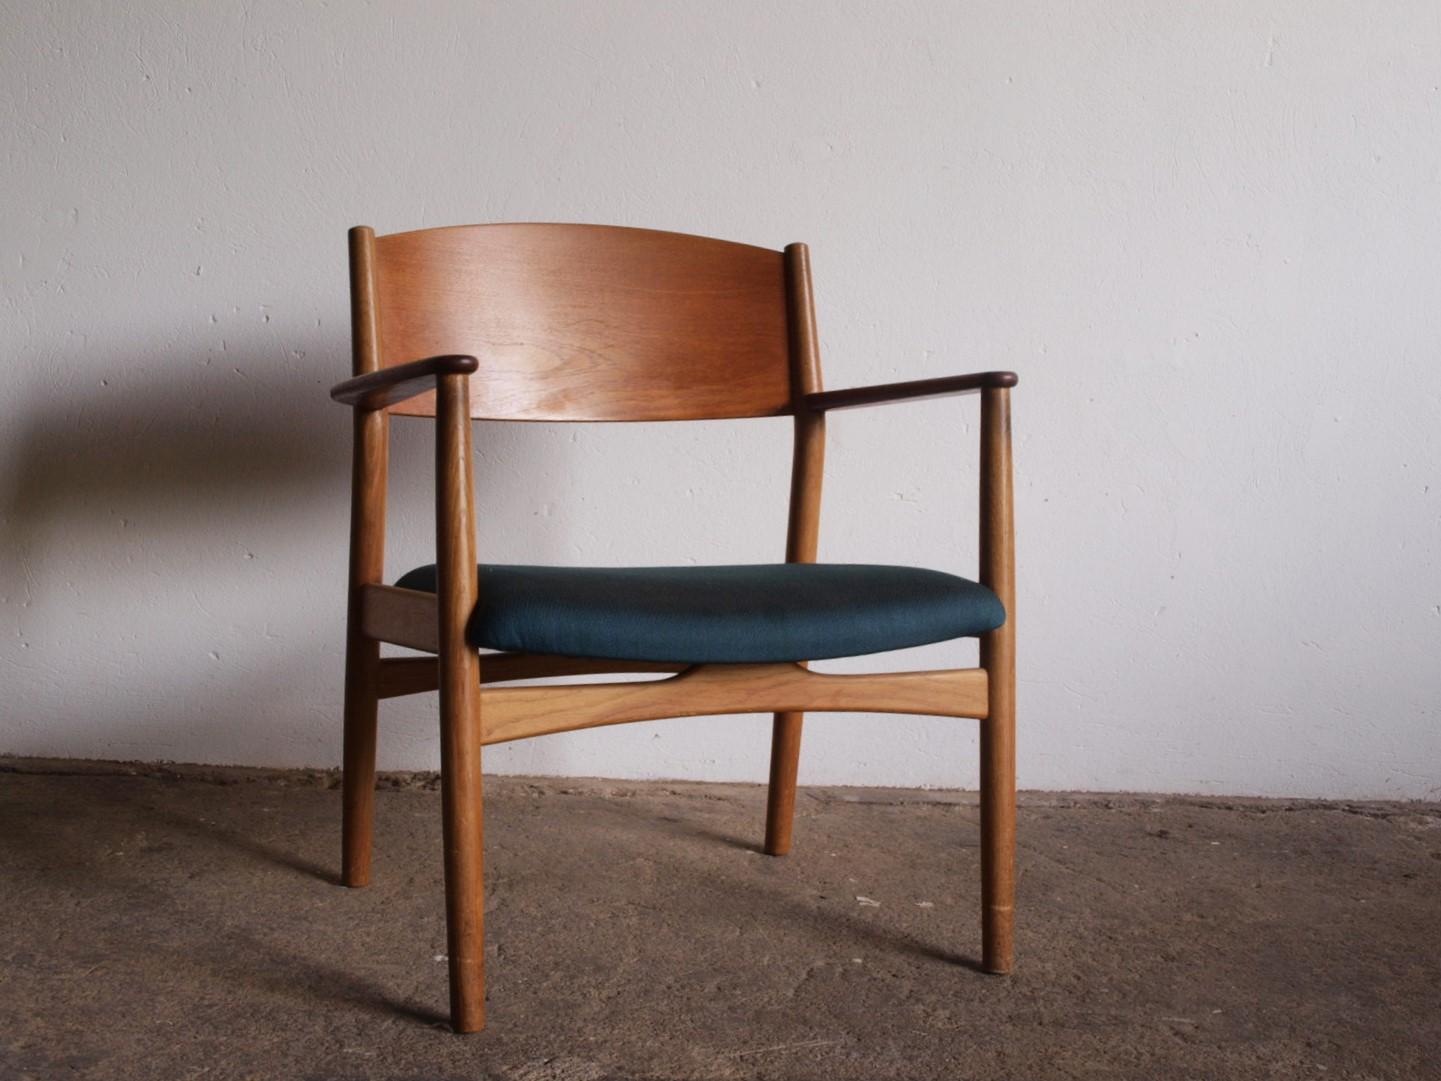 The Model 147, a timeless creation by Danish designer Børge Mogensen in the 1960s, showcases an exquisite blend of solid oak frame and teak armrest and back. This low version of the chair stands as a classical masterpiece that has gracefully endured